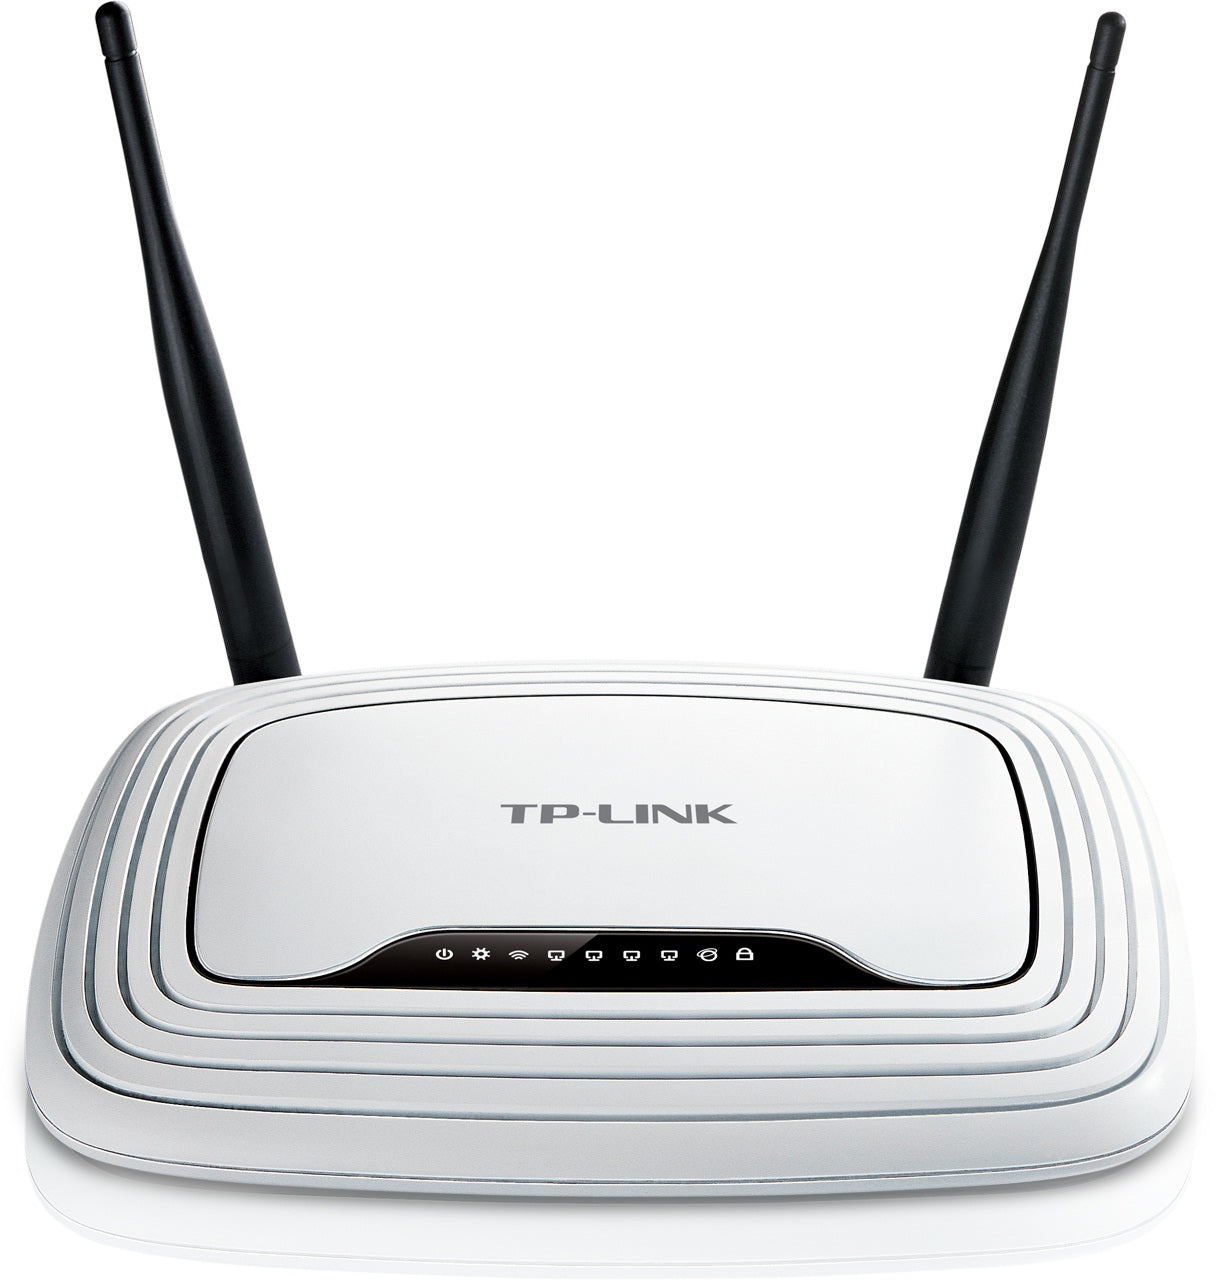 Router Wifi WLTP-LINK 300M, 2.4GHz_TL-WR841N